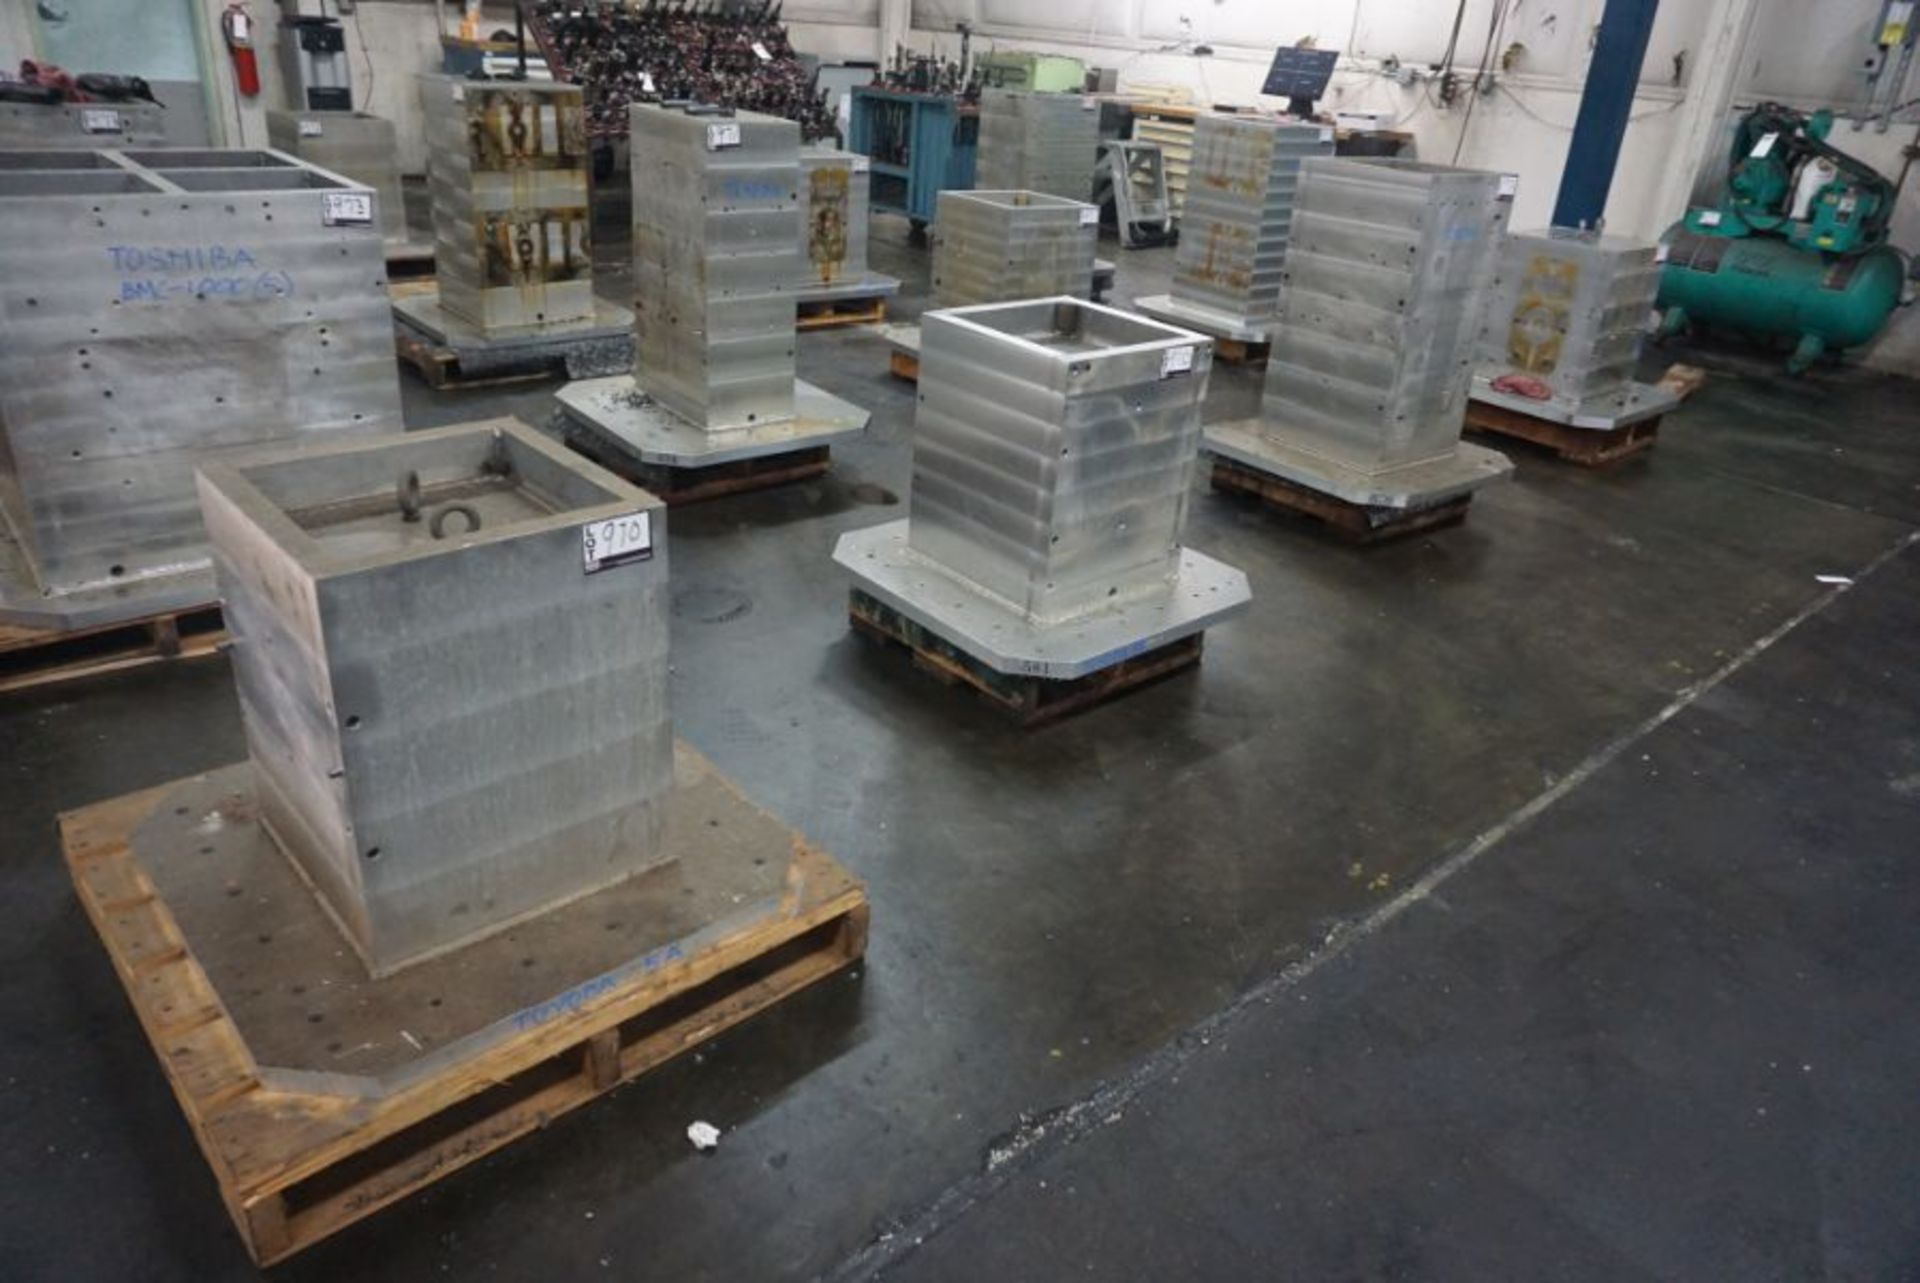 31" X 31" Tombstones for Toyoda FA800